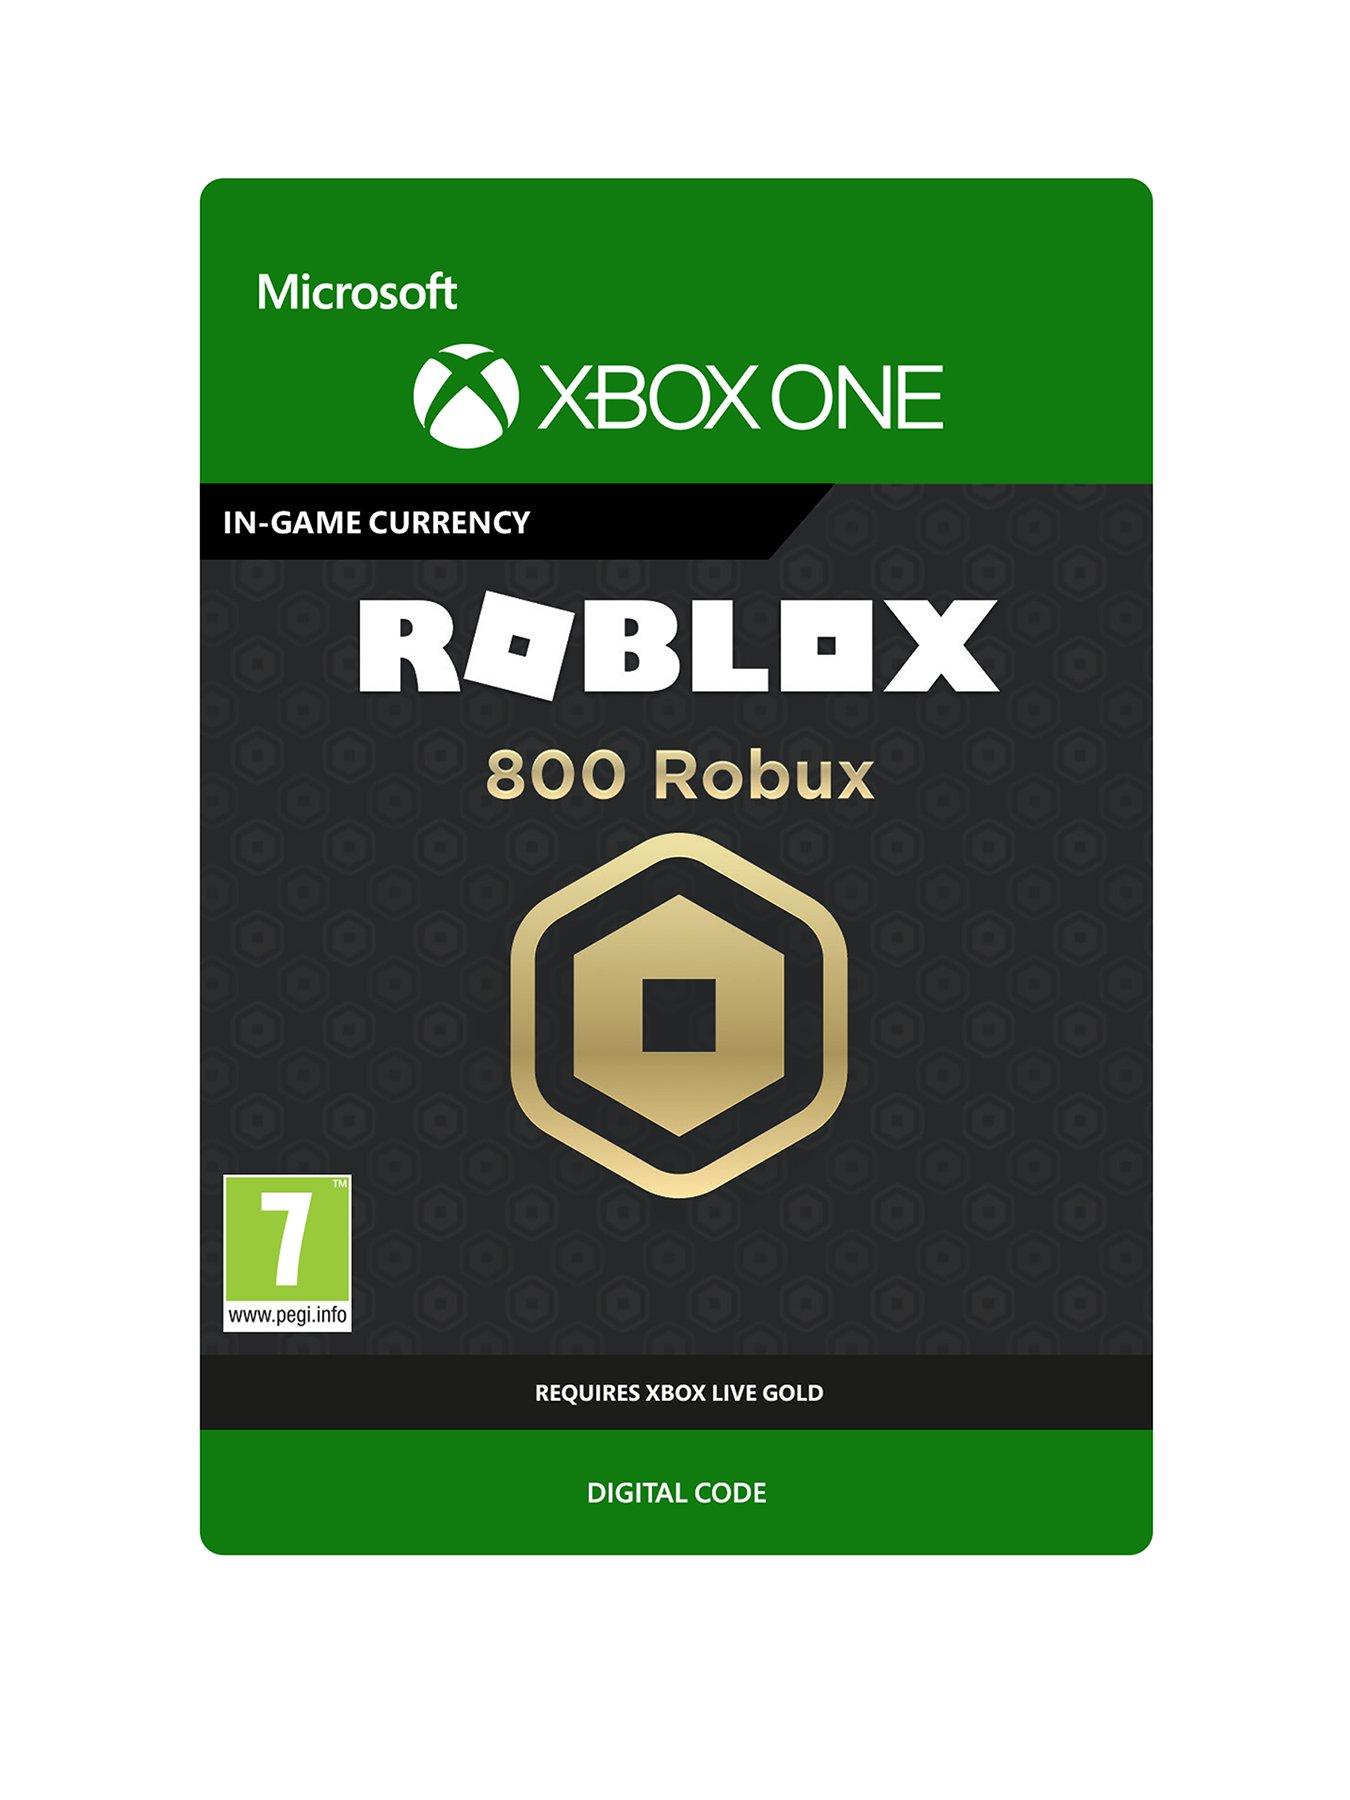 Digital Games Latest Digital Download Games Very Co Uk - roblox treasure hunt simulator xbox one limited robux